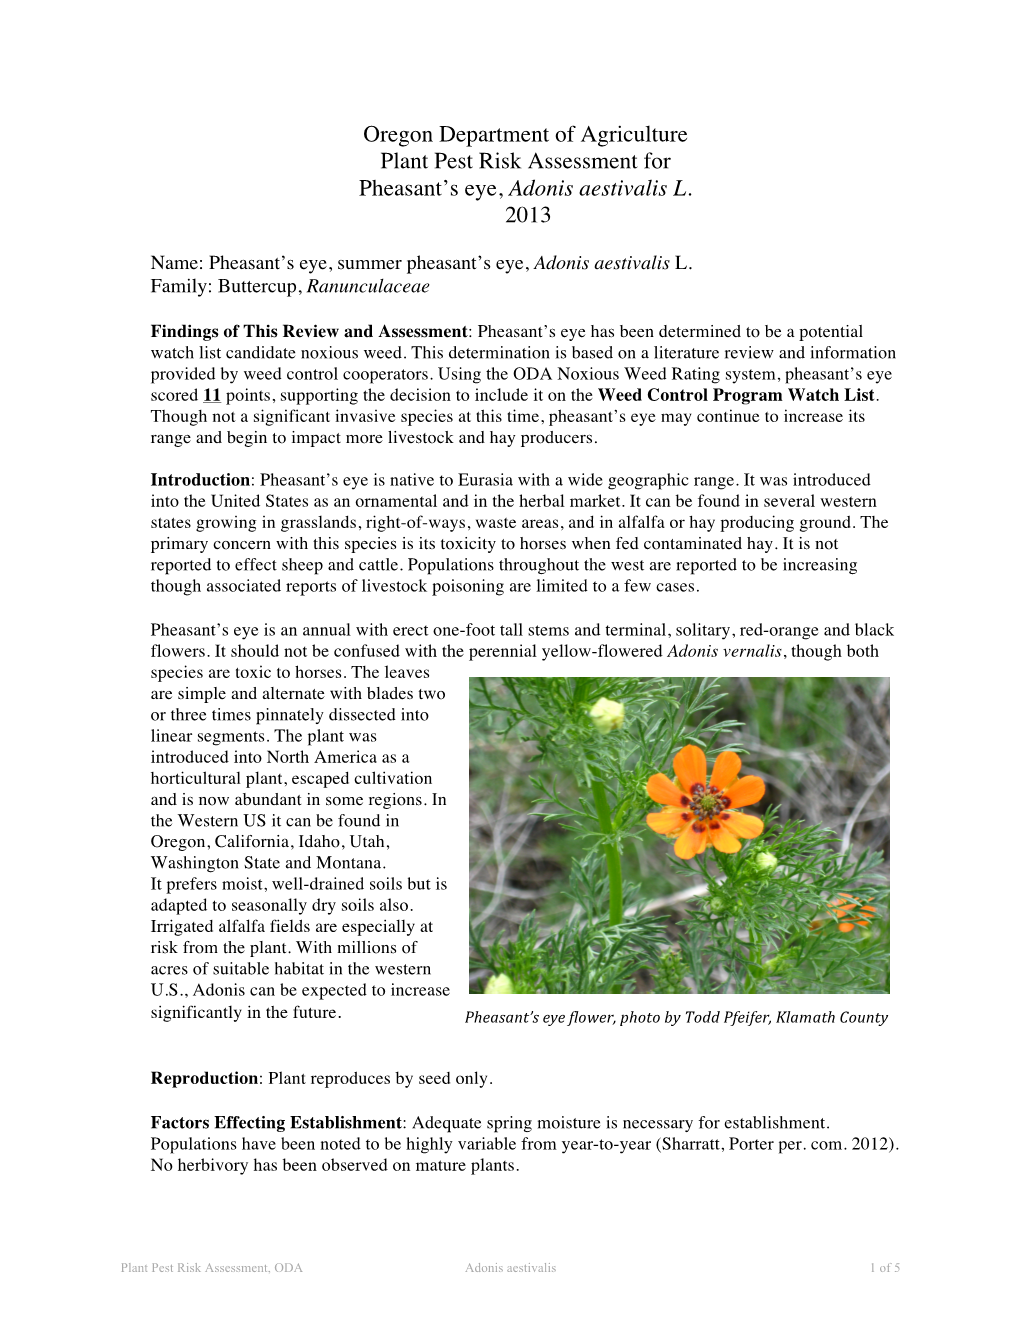 Oregon Department of Agriculture Plant Pest Risk Assessment for Pheasant’S Eye, Adonis Aestivalis L